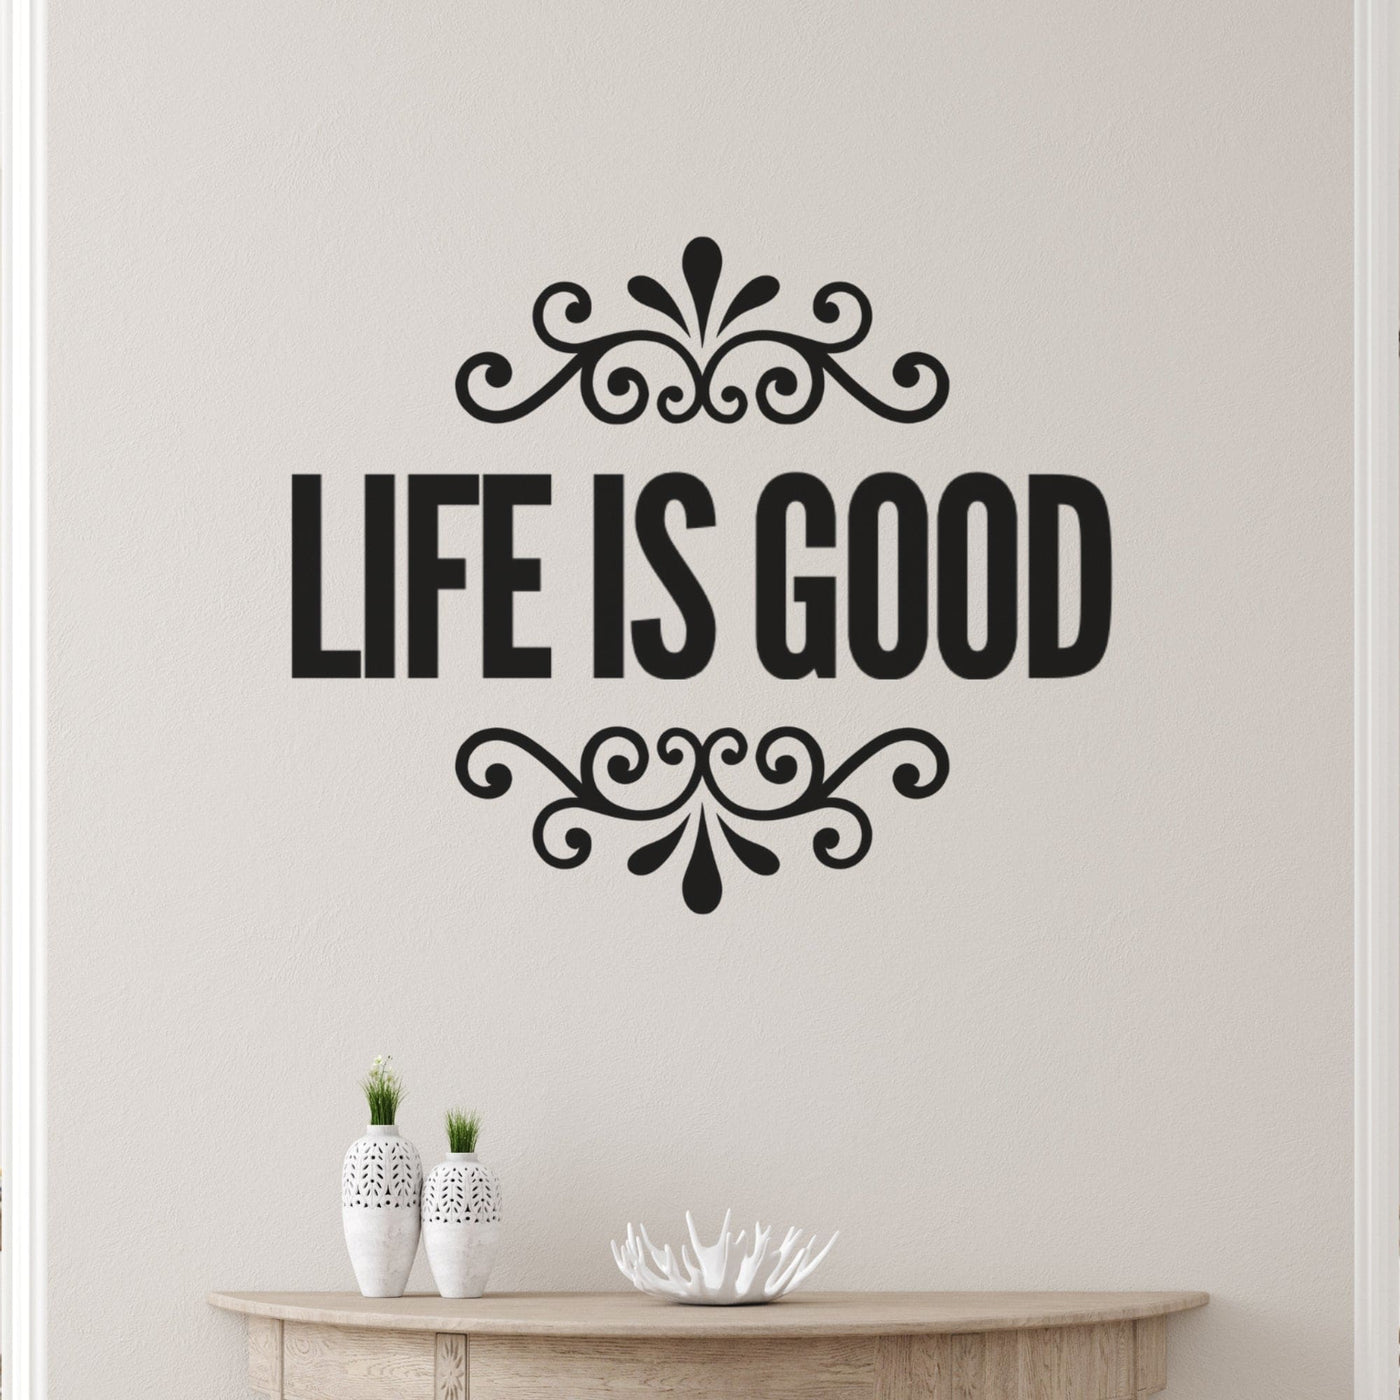 Decor - Life Is Good Removable Vinyl Wall Decal Easy Peel And Stick Wall Art -